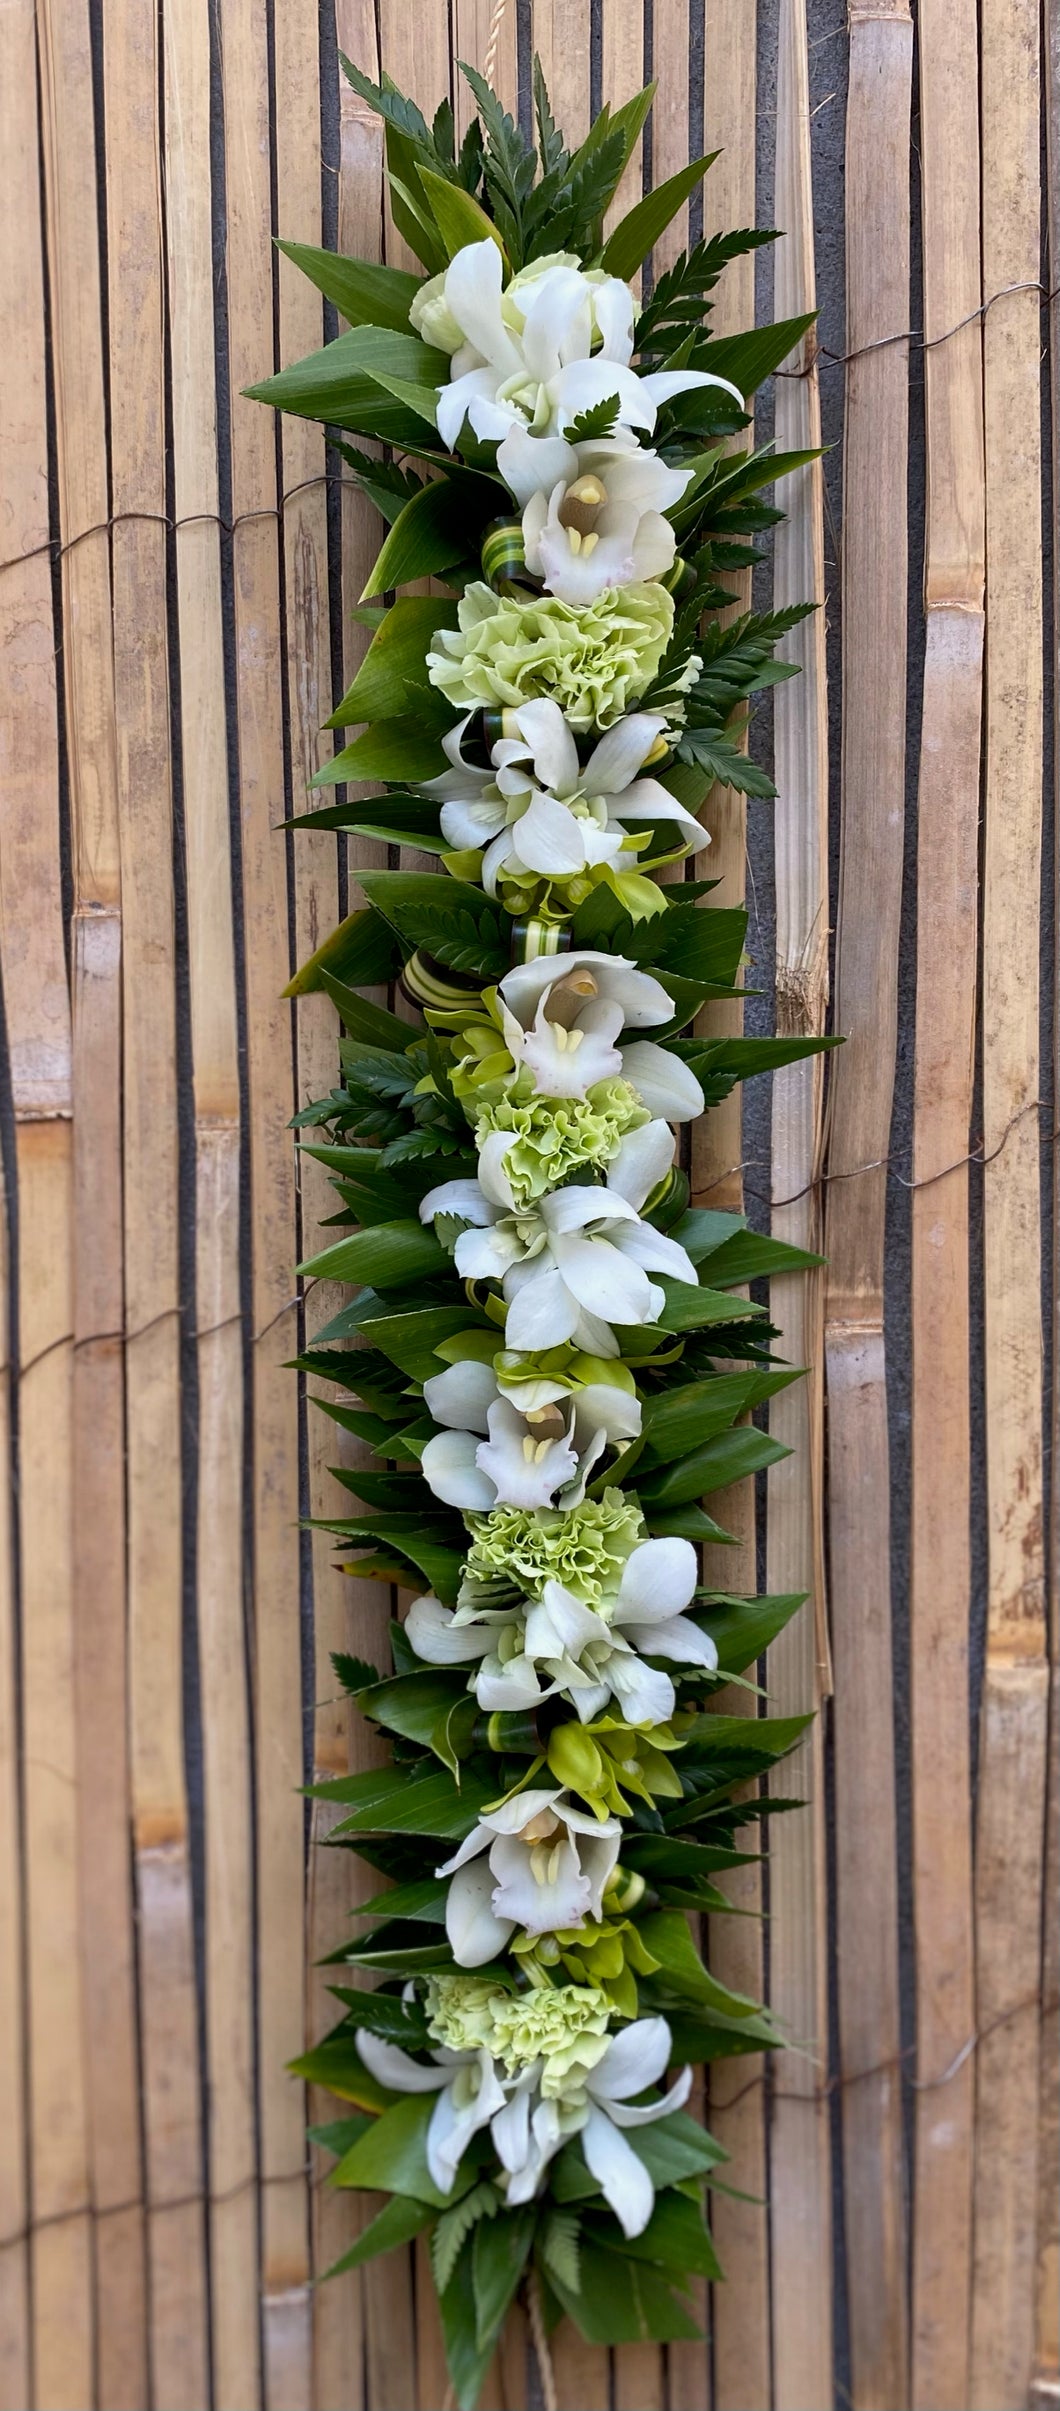 Wedding Pack - Haku/Flower Crown for Bride, Maile Ti Leaf Lei for Groom